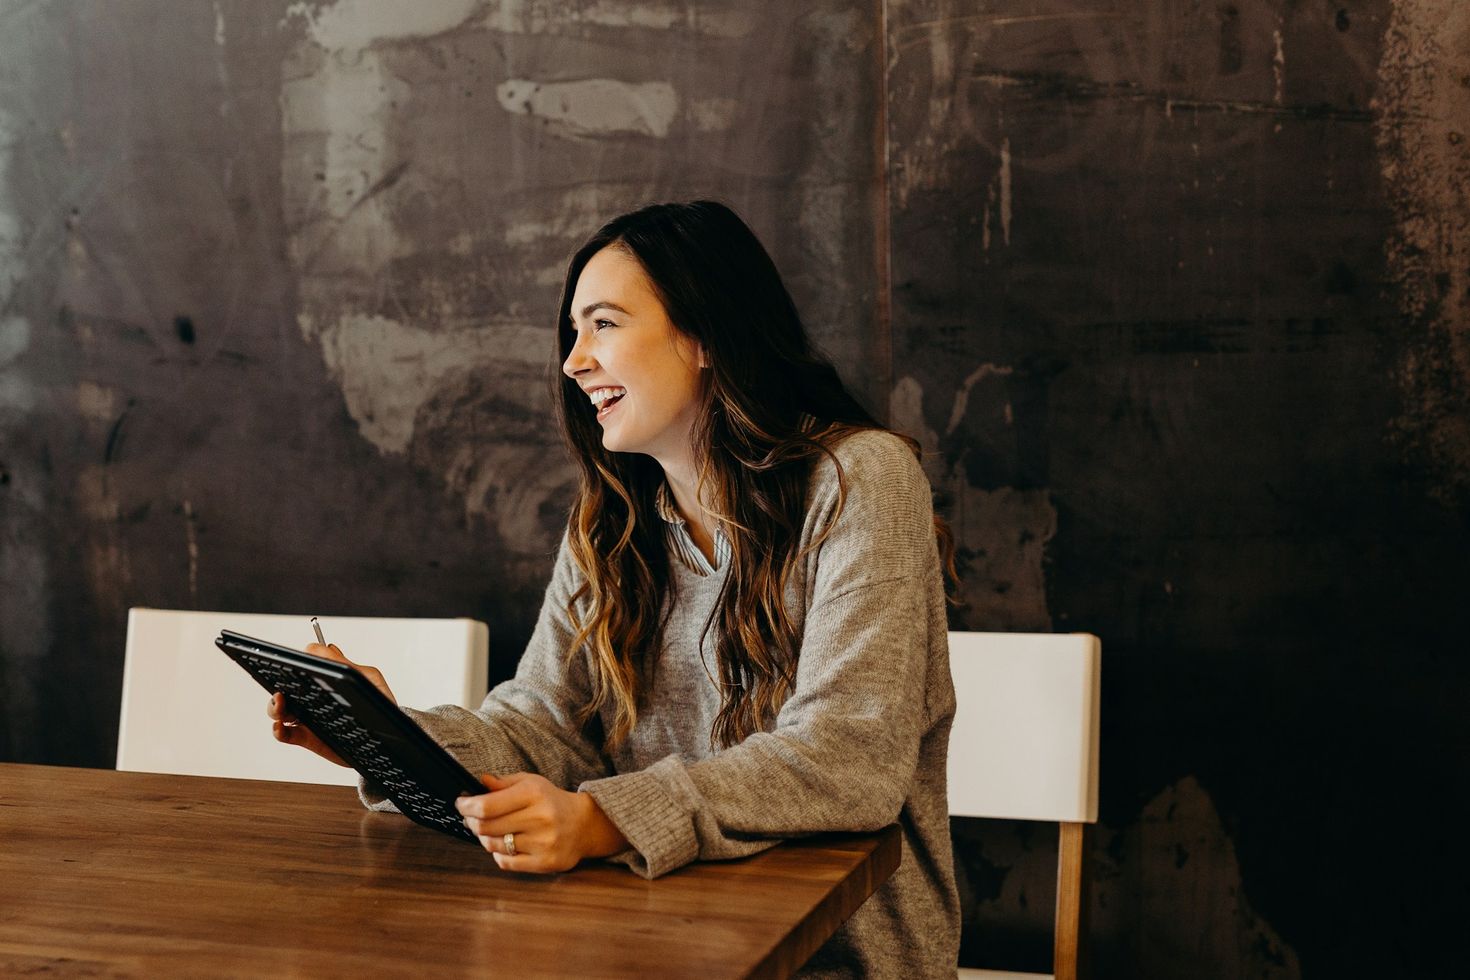 A joyful woman seated at a wooden table, holding a clipboard and engaged in conversation, in a stylish workspace with an artistic grey wall, embodying creativity and productivity.